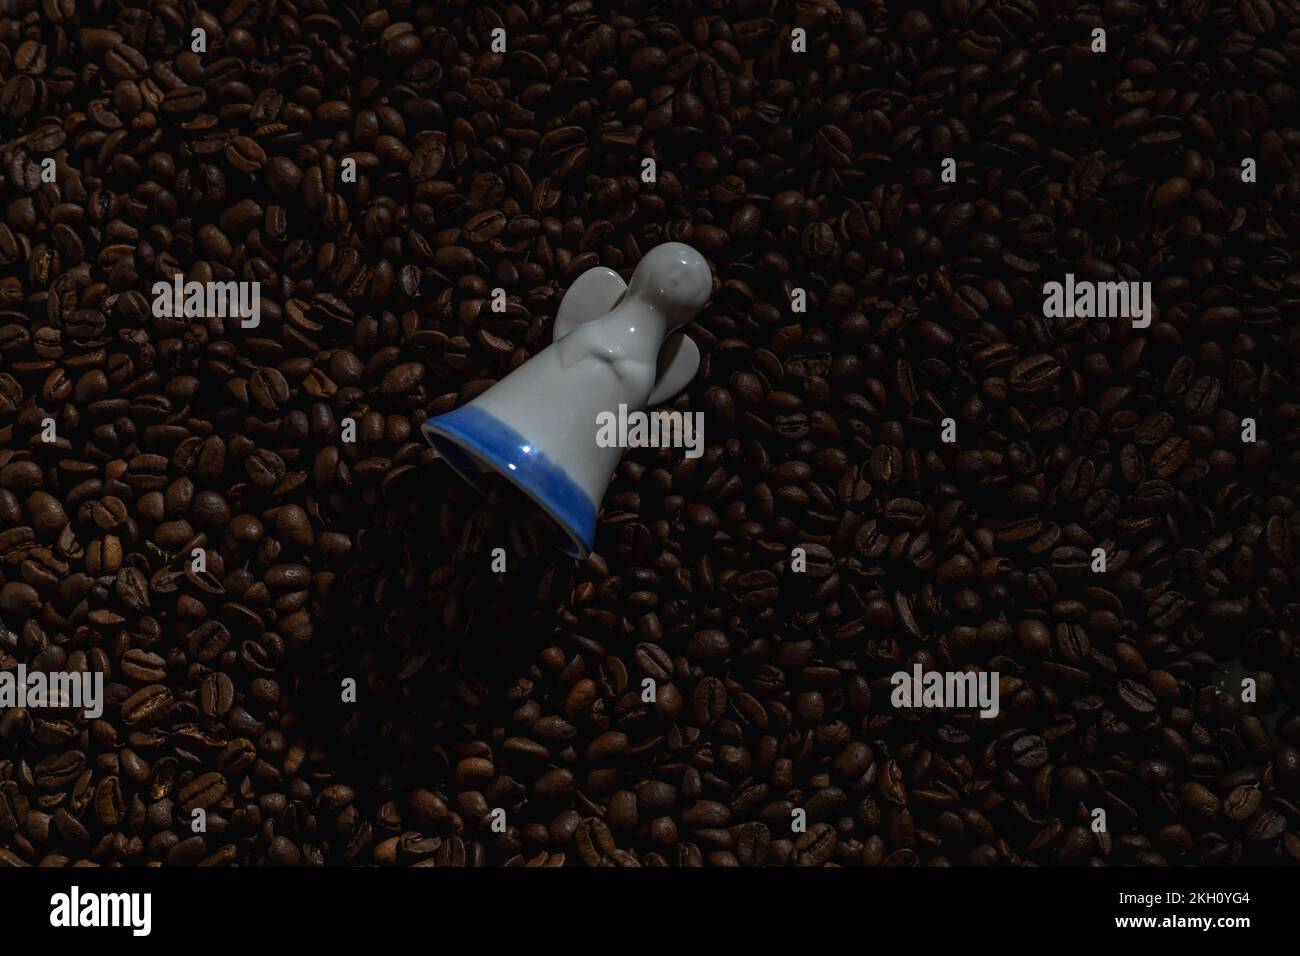 Figurine of an angel on a background of coffee beans Stock Photo